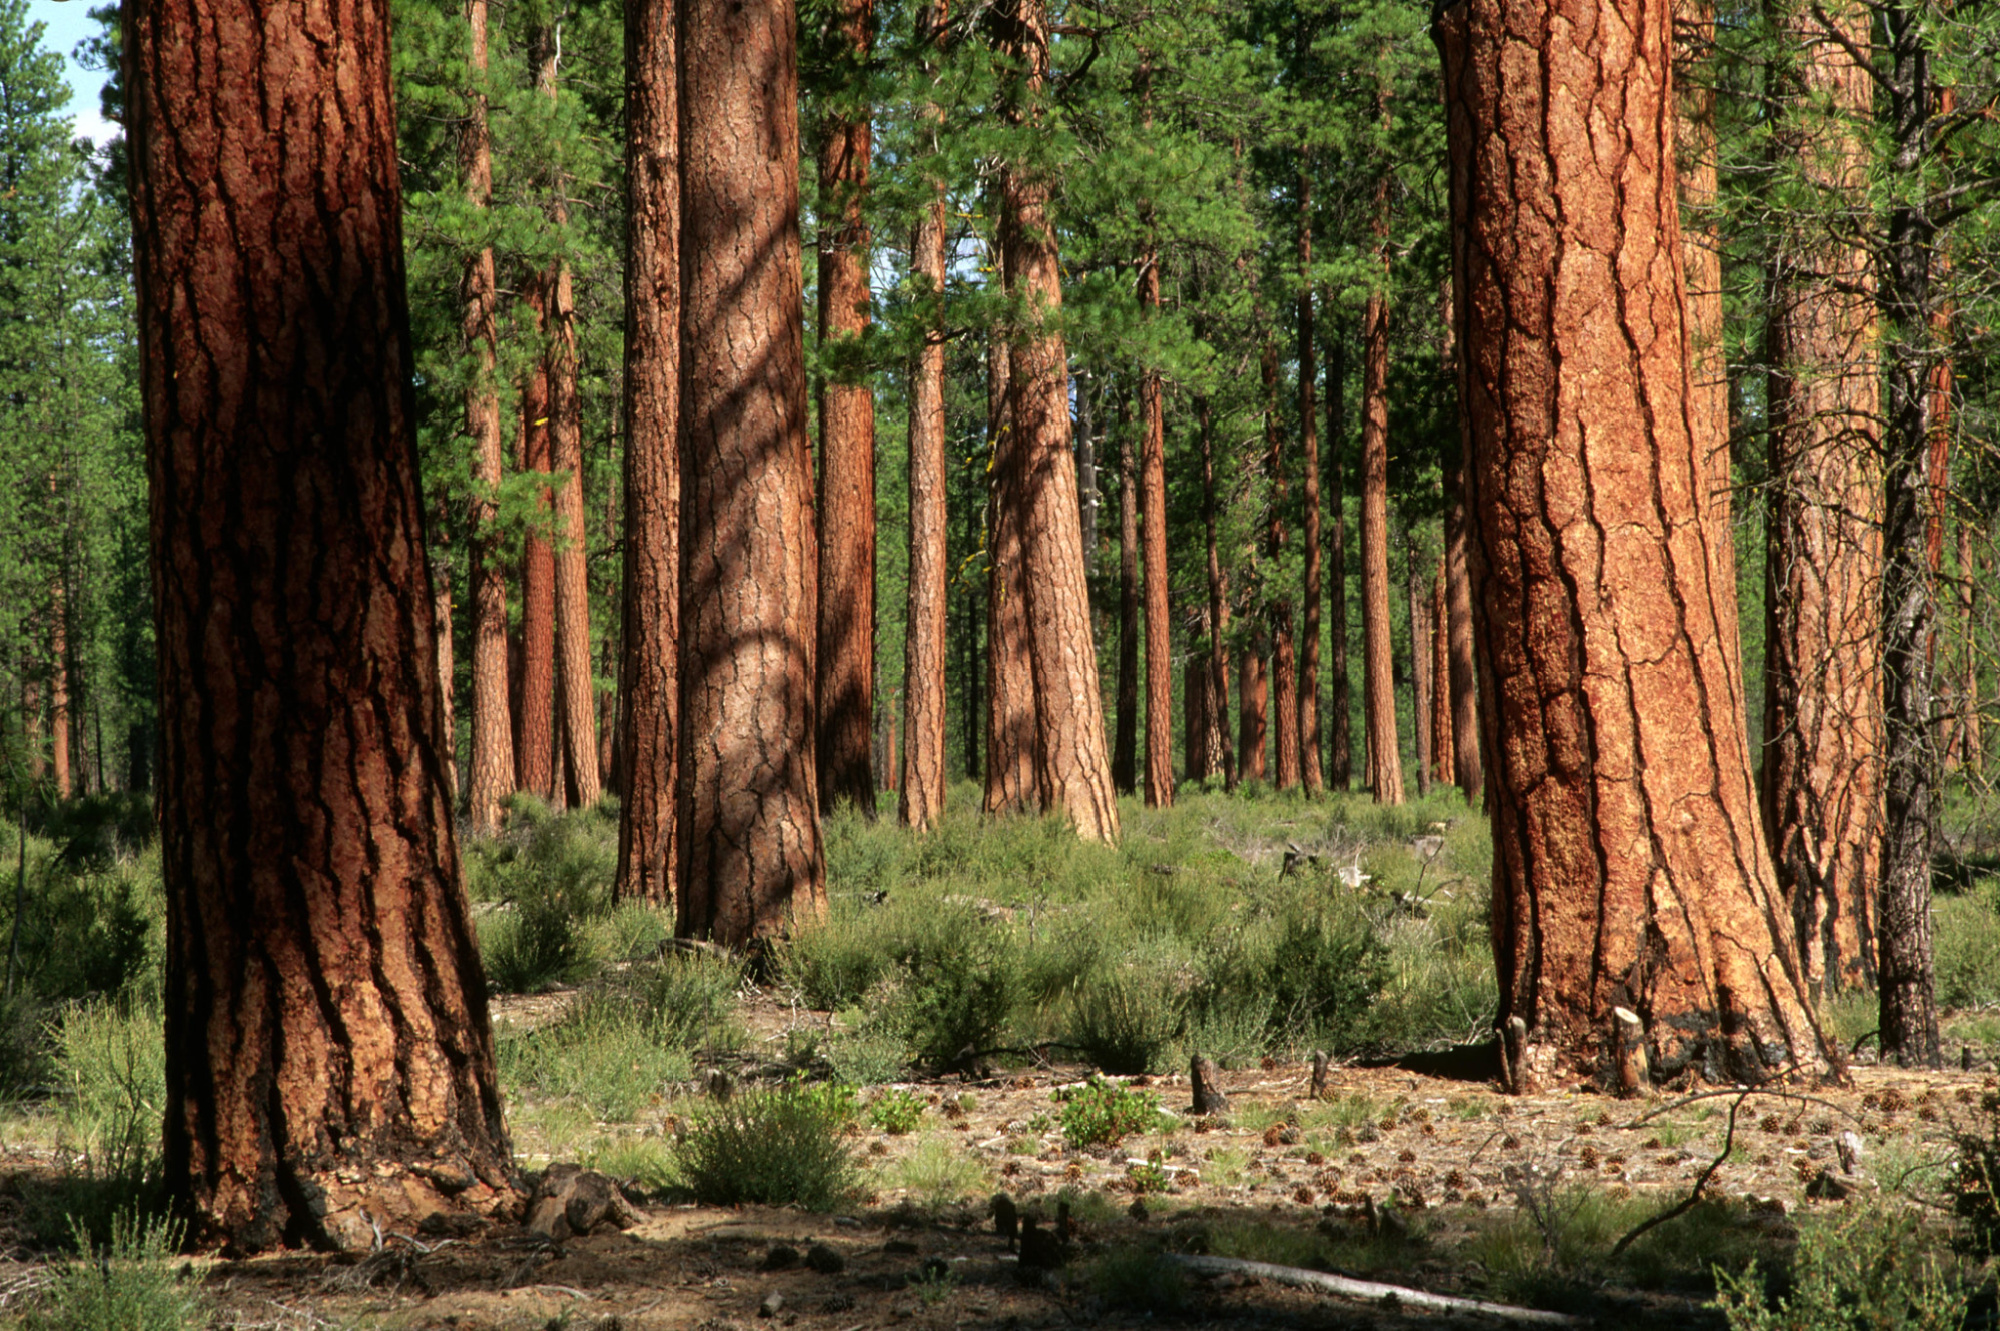 A stand of old growth ponderosa pine trees.